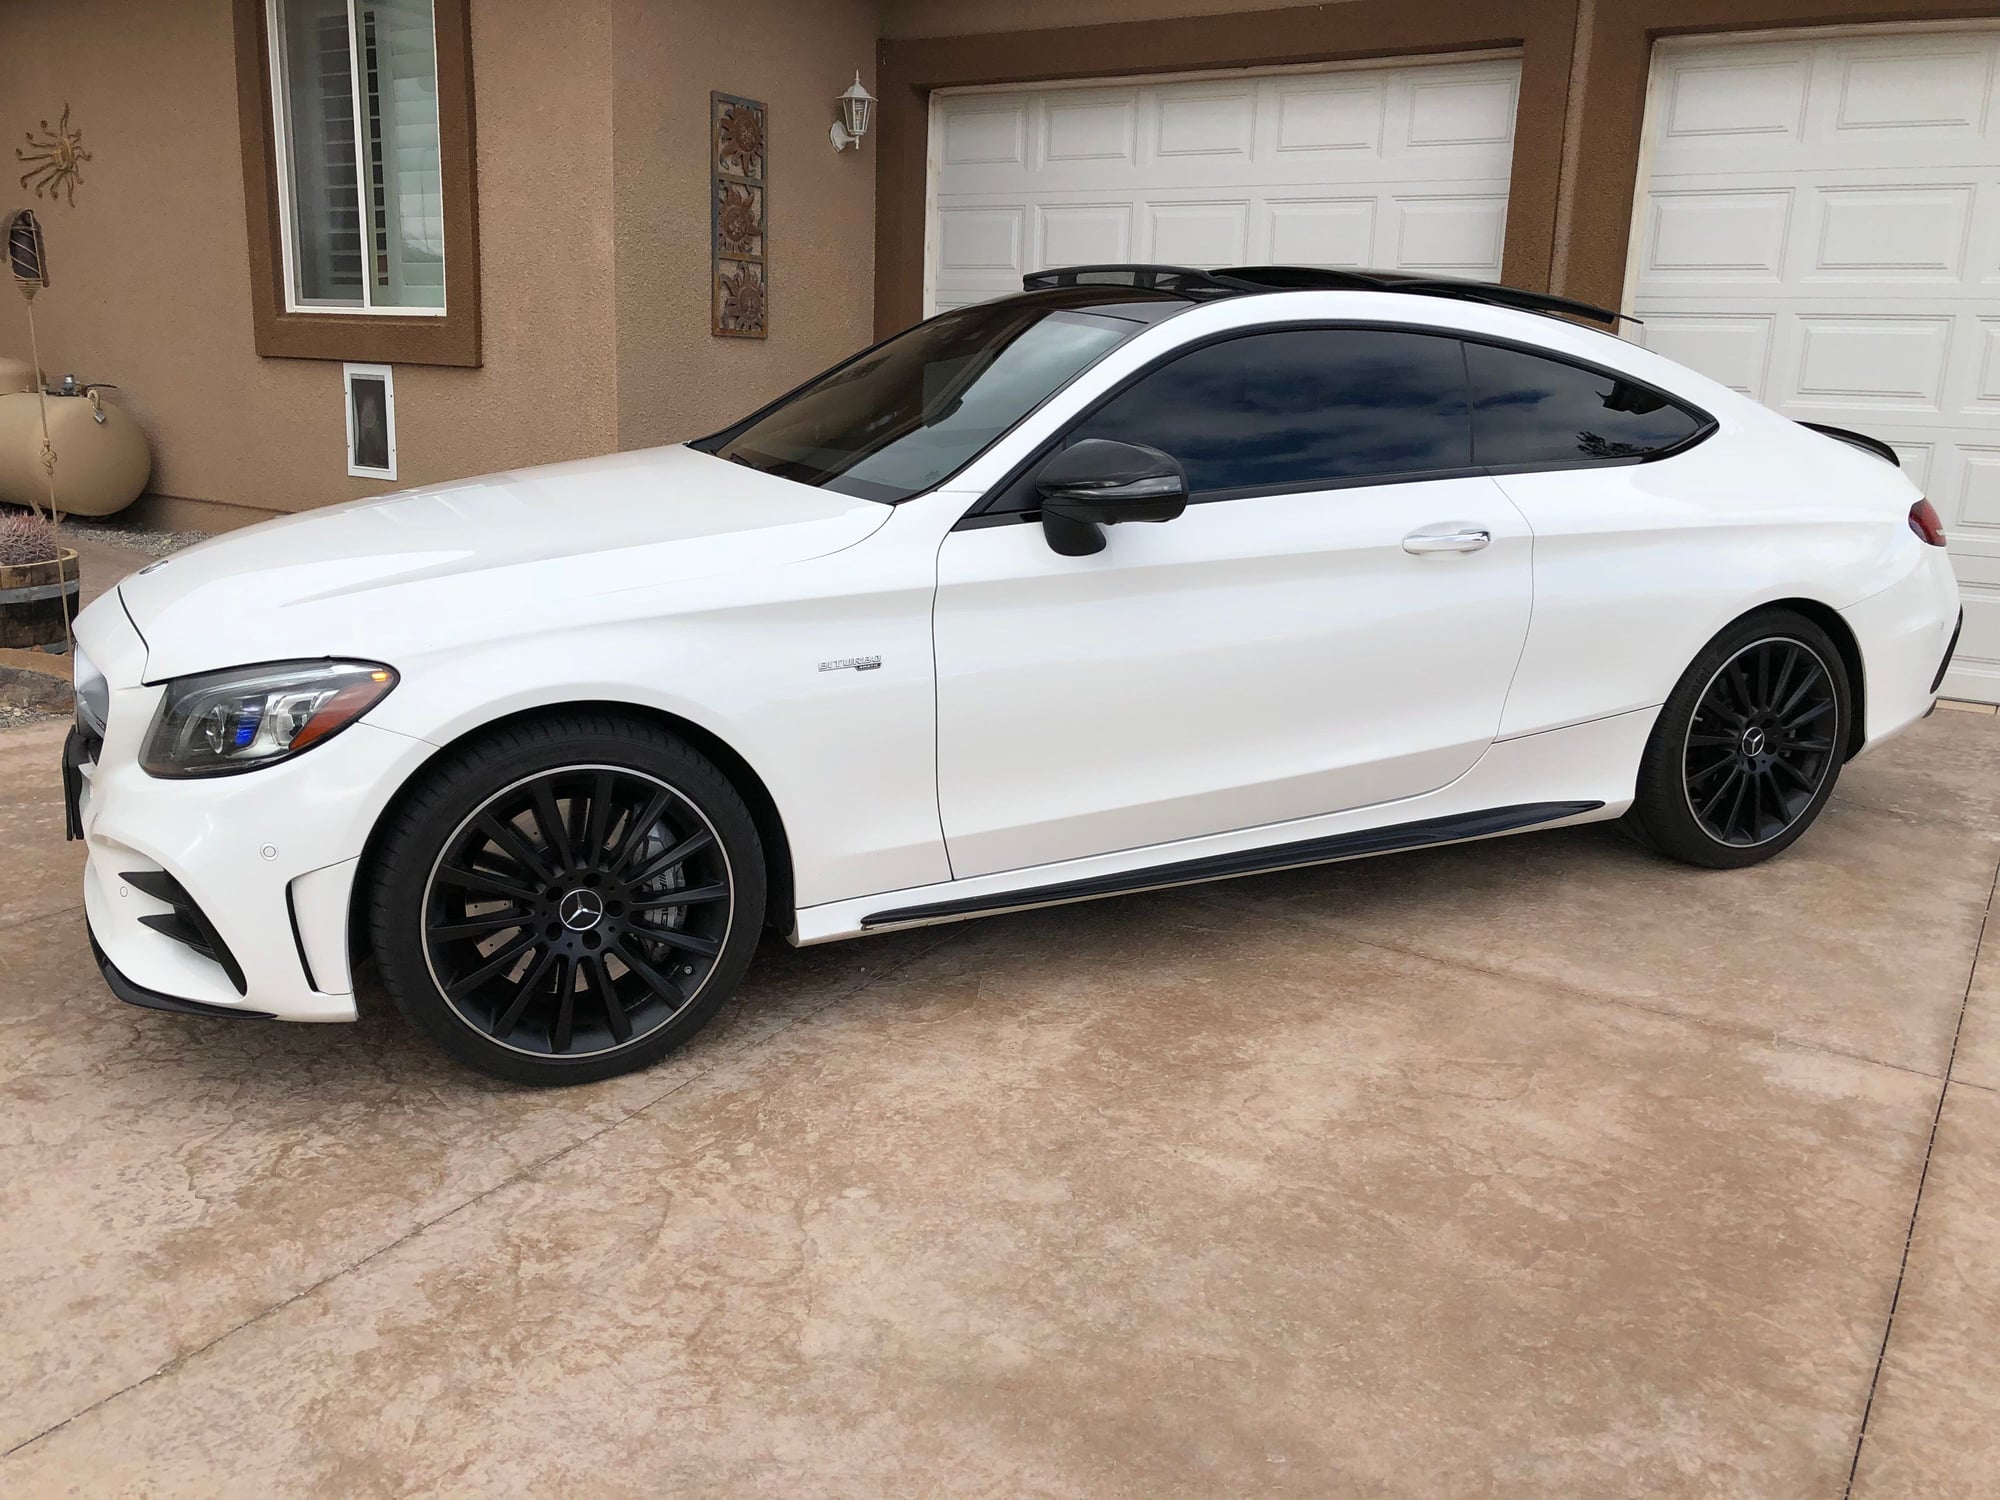 2019 Mercedes-Benz C43 AMG - 2019 C43 Coupe - 22k miles - Used - VIN WDDWJ6EBXKF874625 - 22,000 Miles - 6 cyl - AWD - Automatic - Coupe - White - Sunnyvale, CA 94089, United States